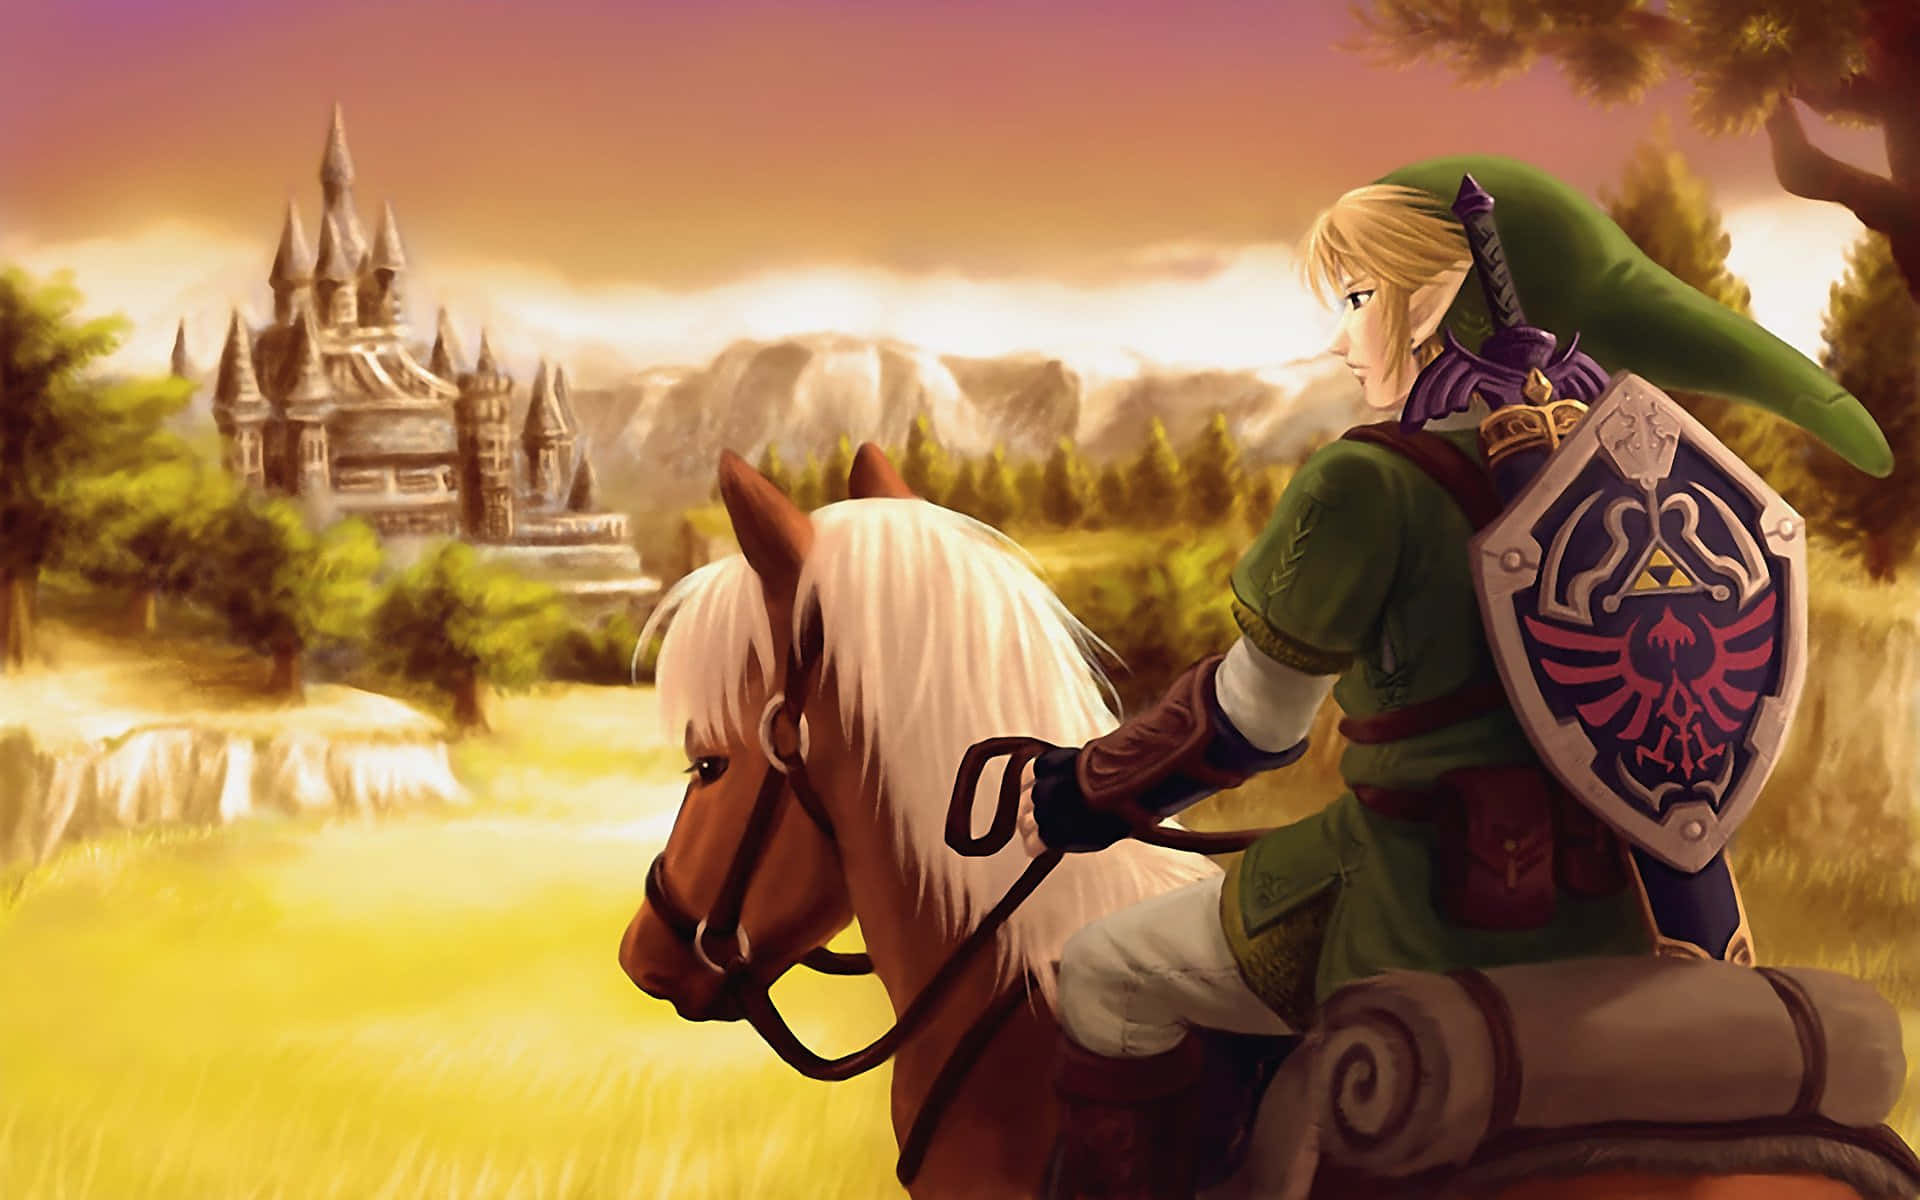 Link and Epona gallop through the forest in The Legend of Zelda Wallpaper